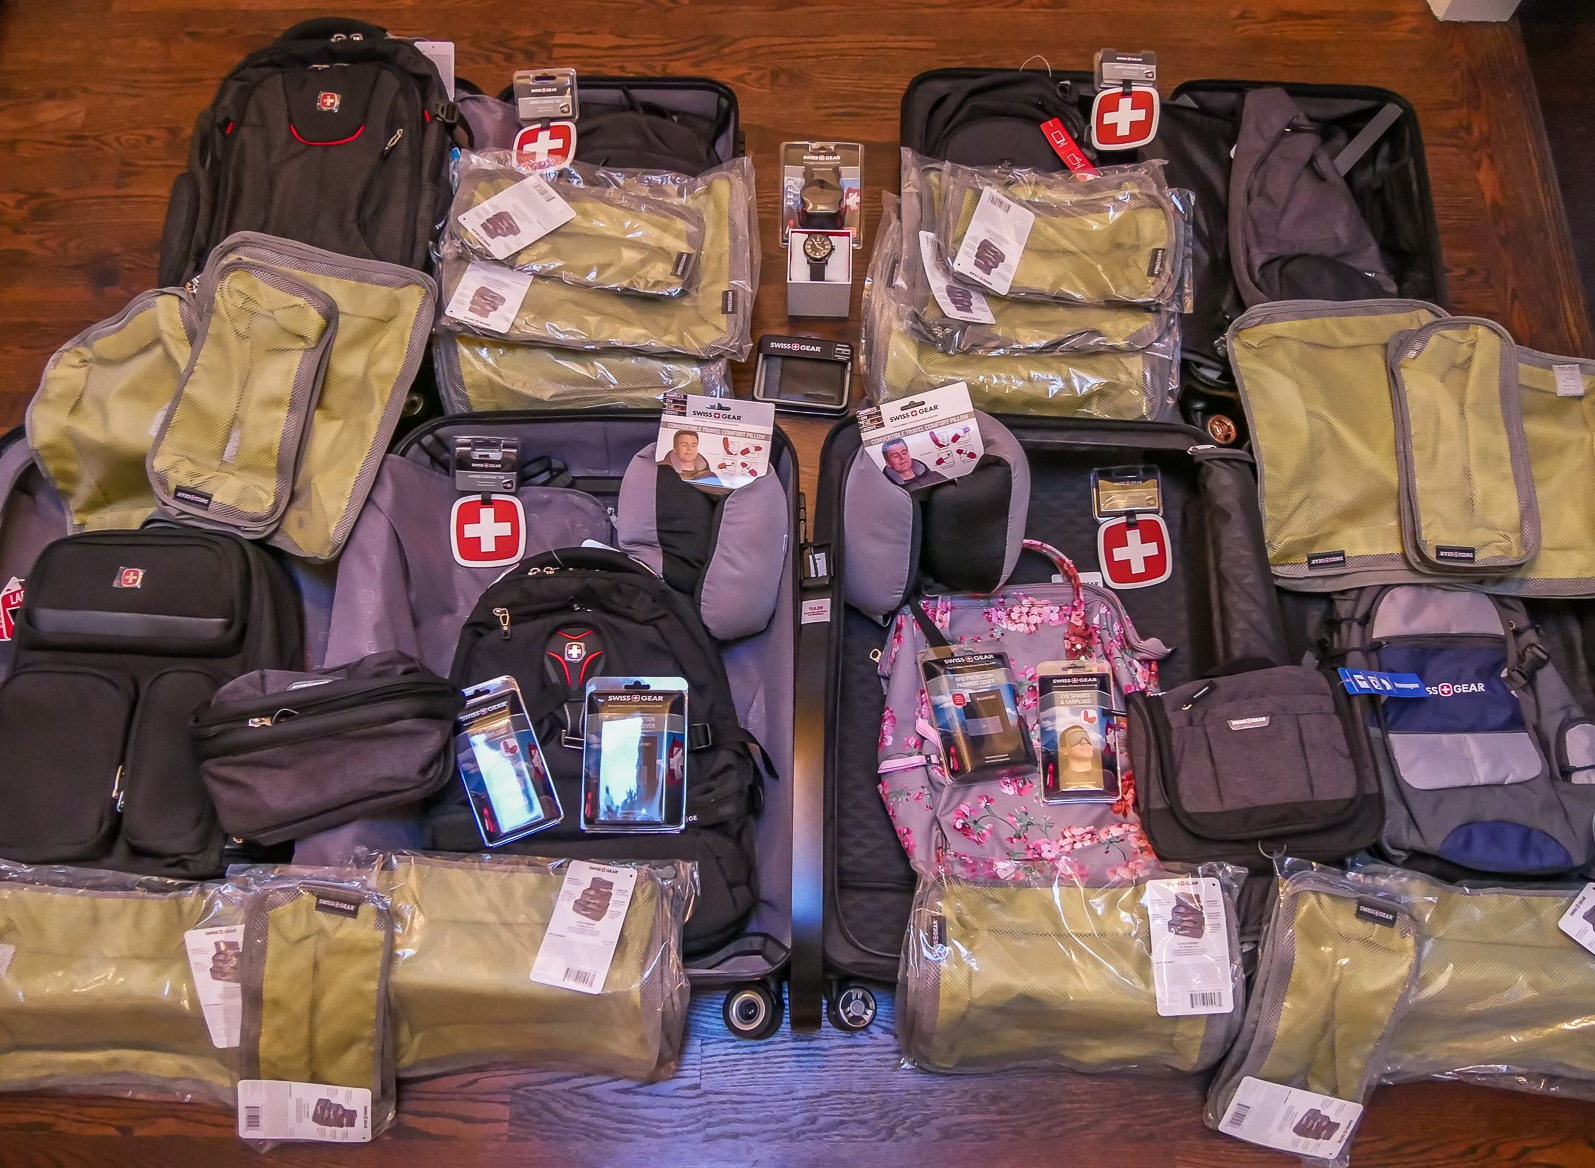 Our first shipment of gear from SWISSGEAR for New Zealand